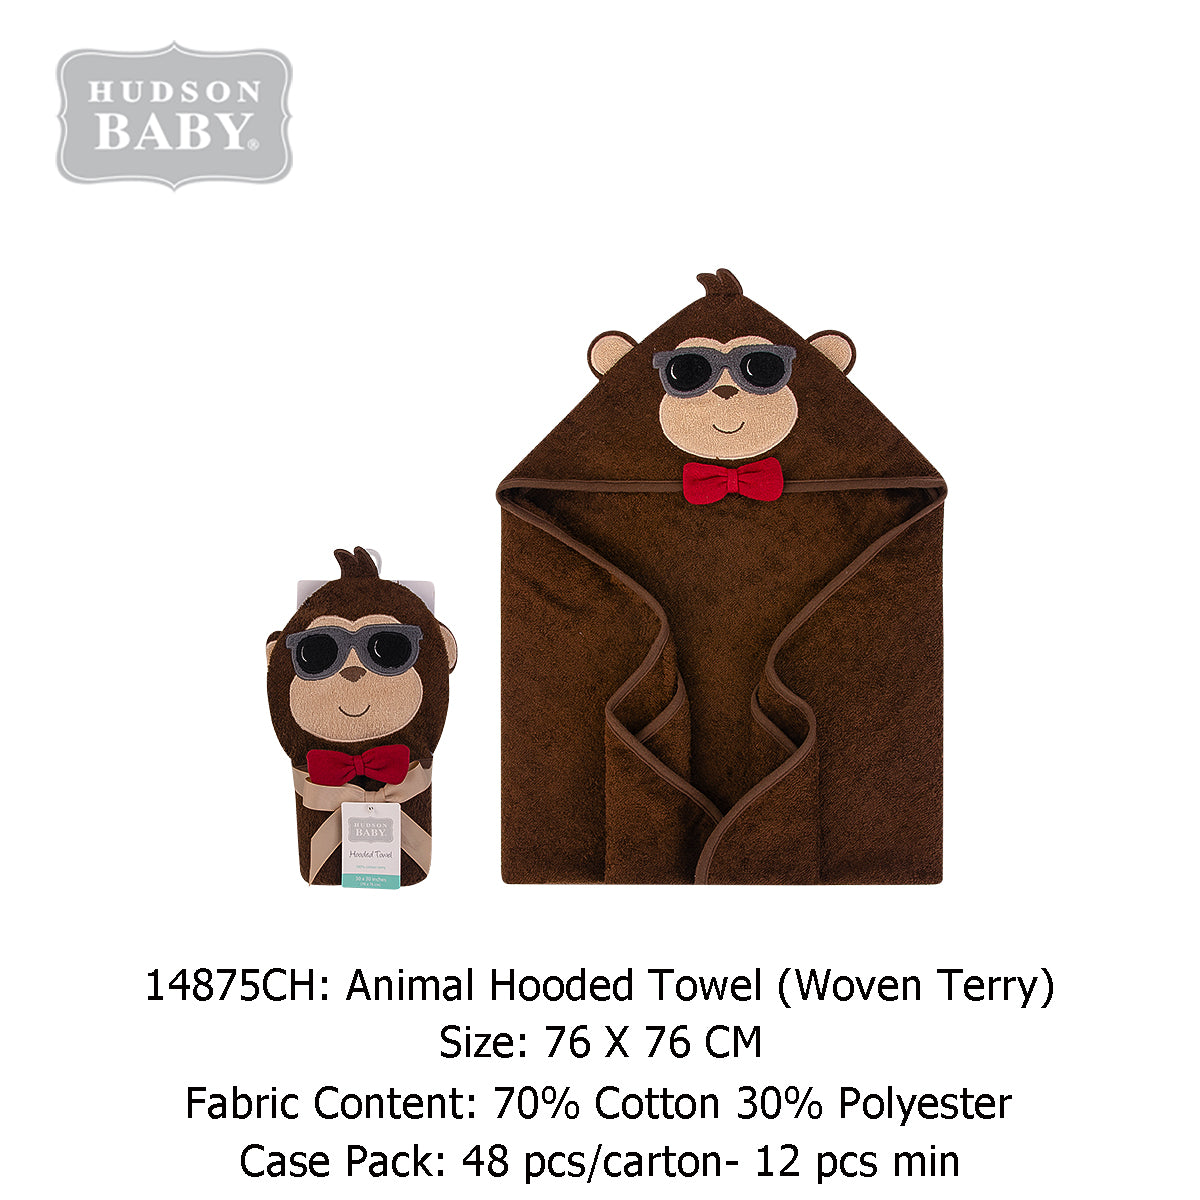 Hudson Baby Animal Hooded Towel (Woven Terry)